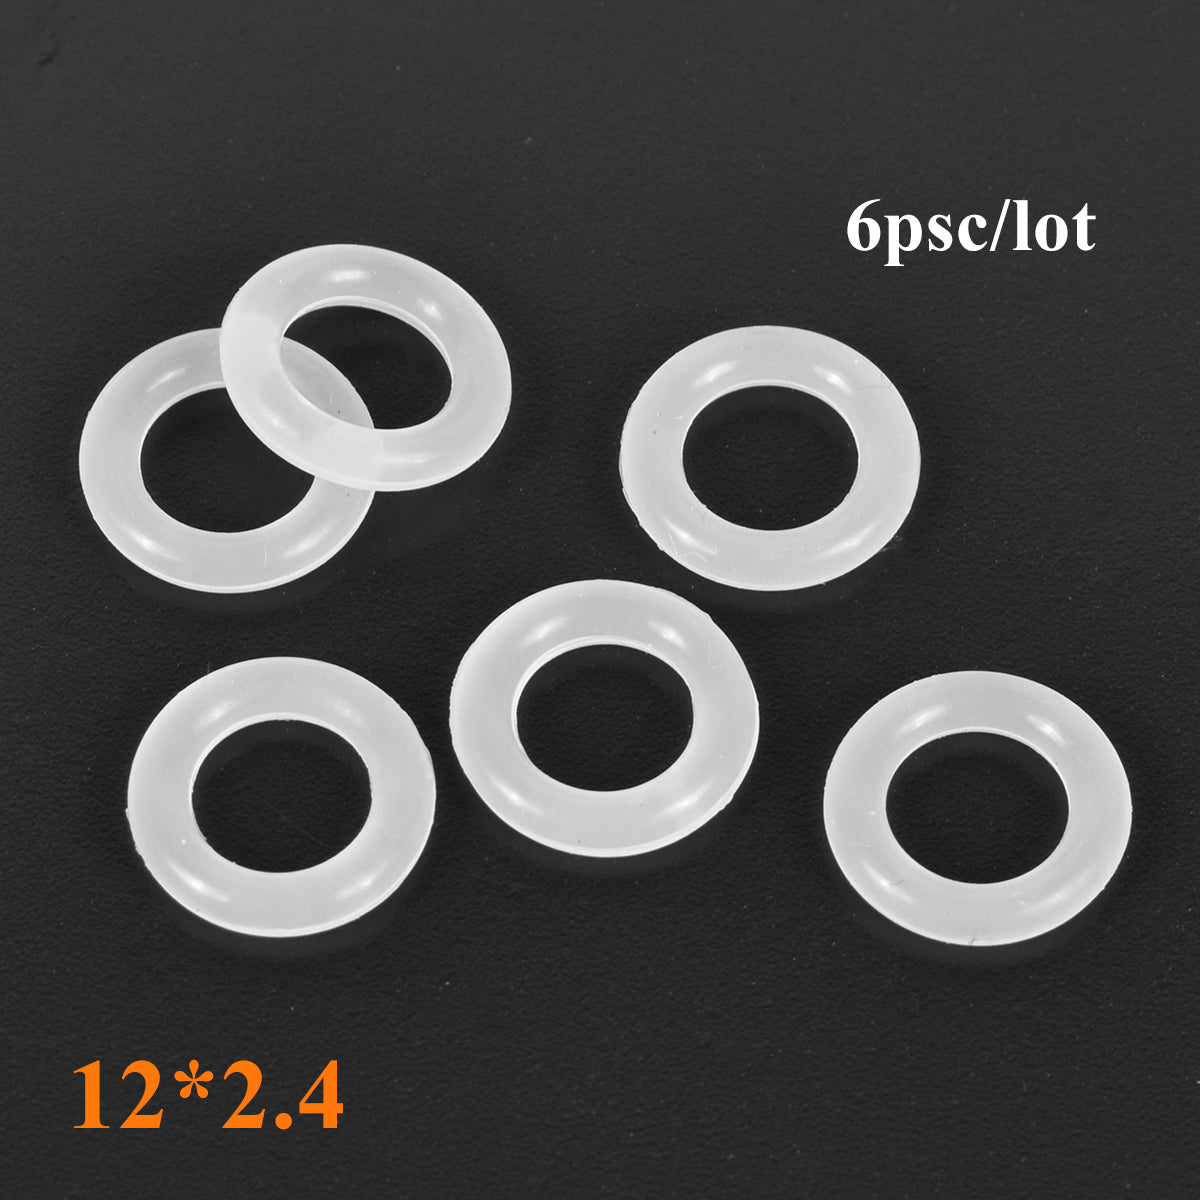 6Pcs/lot Silica Gel Washer Seals White Silicon Dia. 12mm Thickness 2.4mm Rubber O-rings Sealing Gasket For Xenon Krypton Lamp